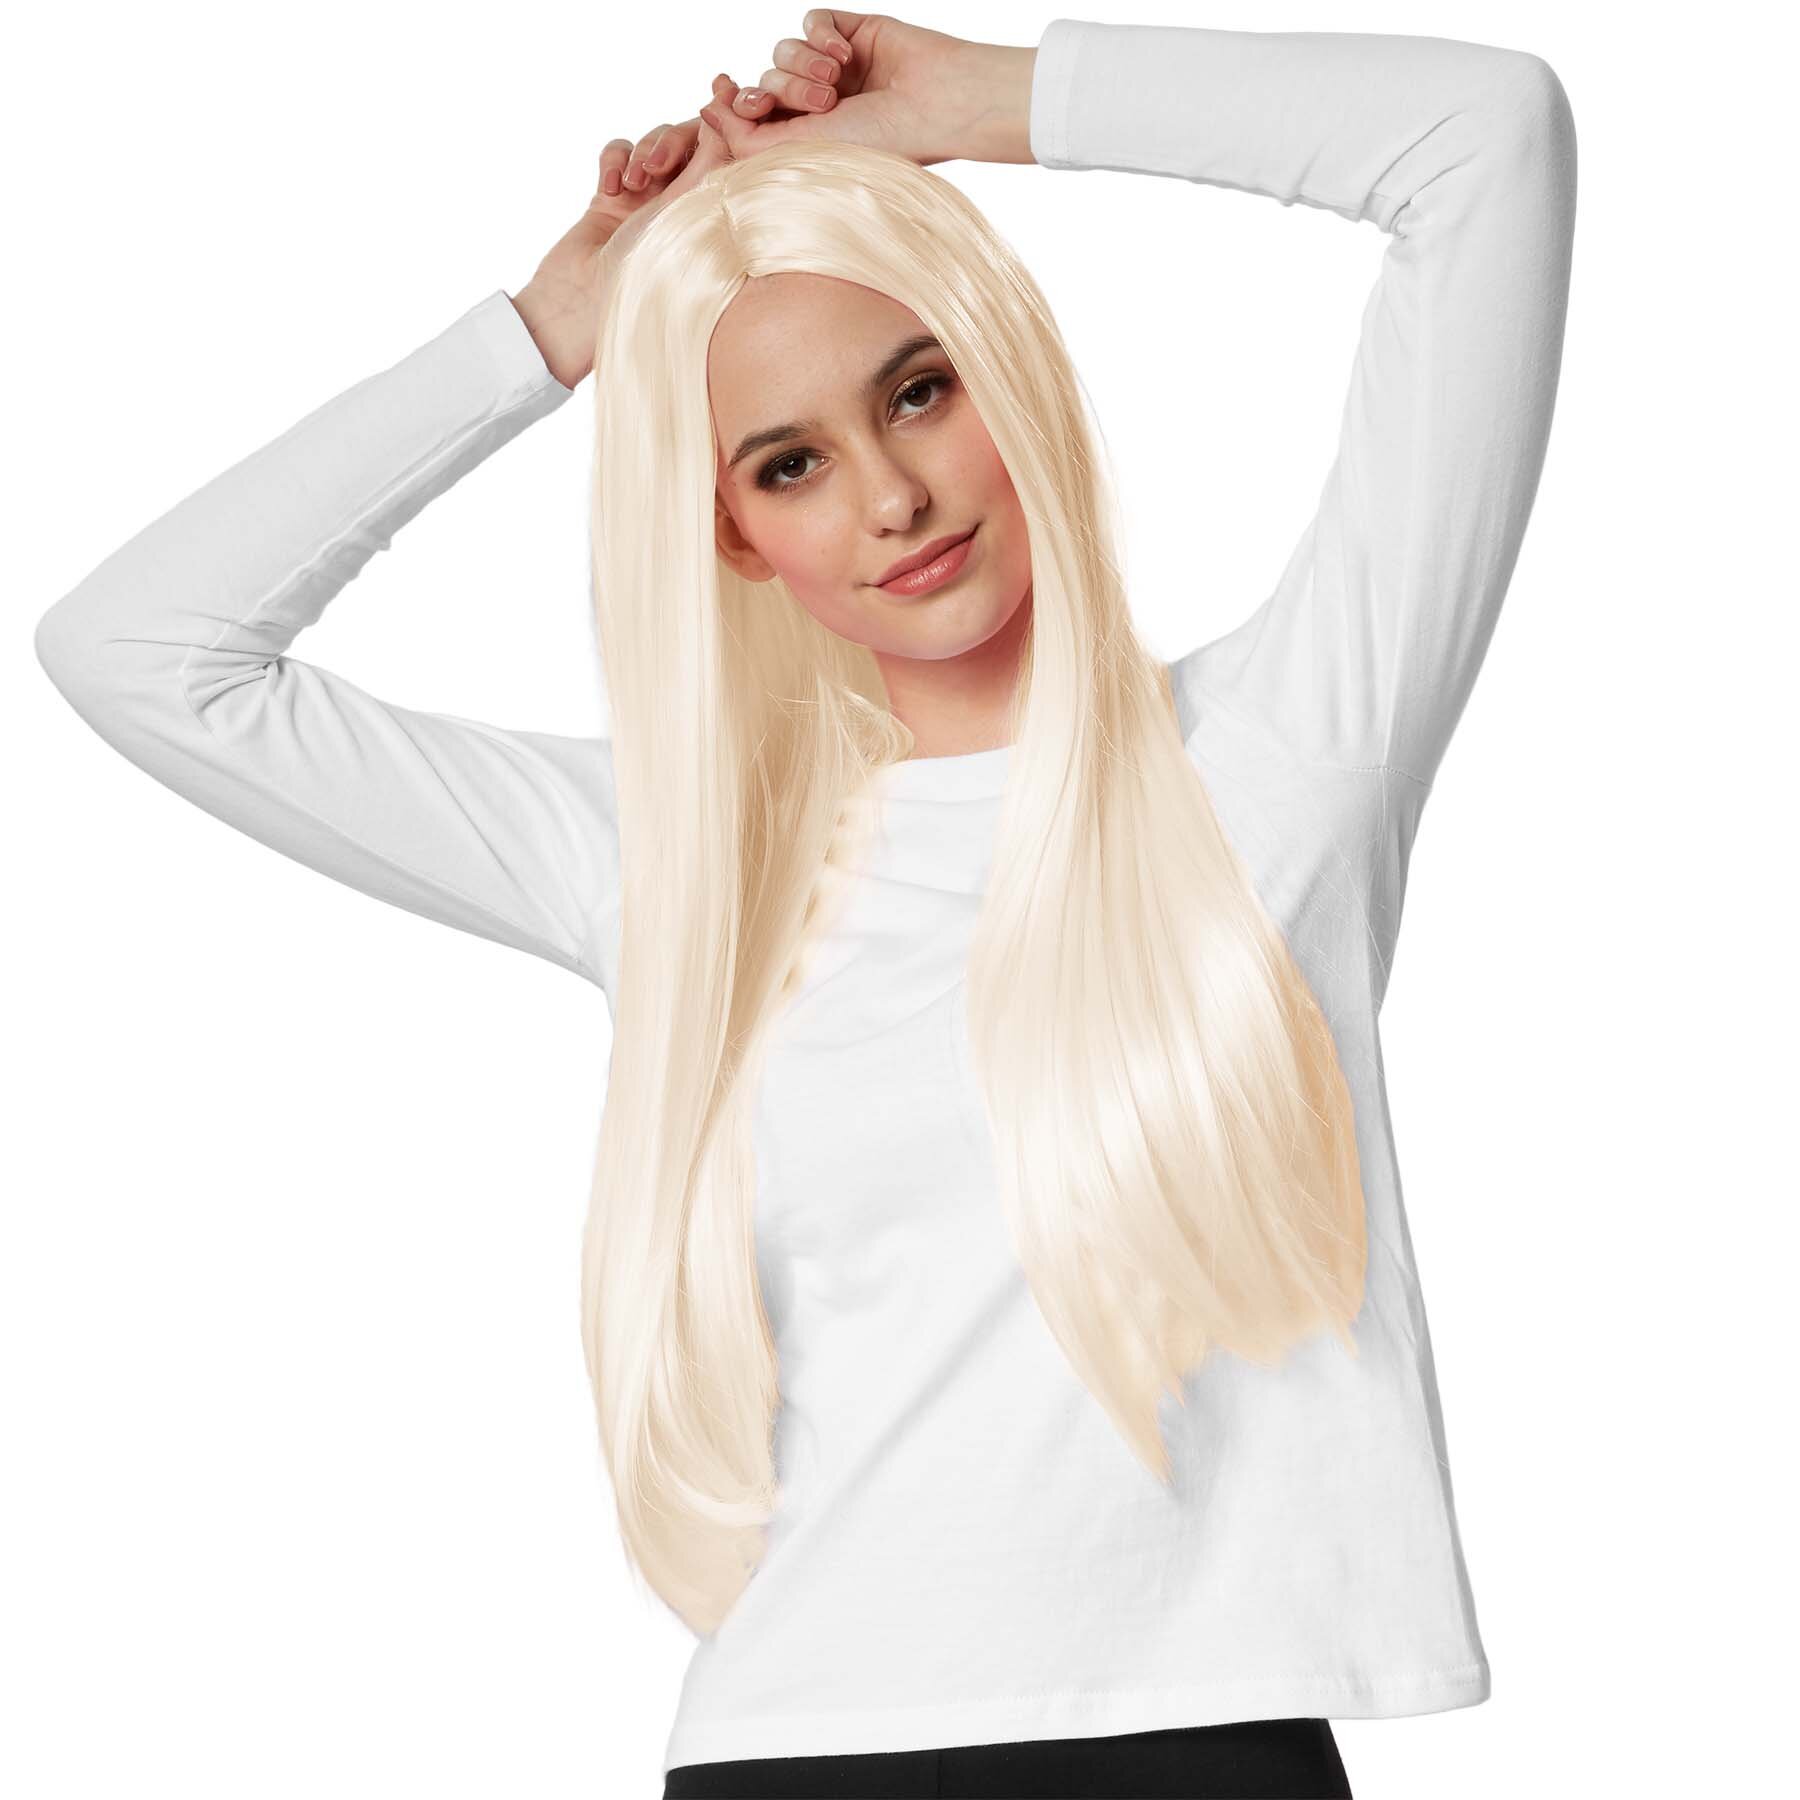 tectake Straight Long-Haired Wig - blond